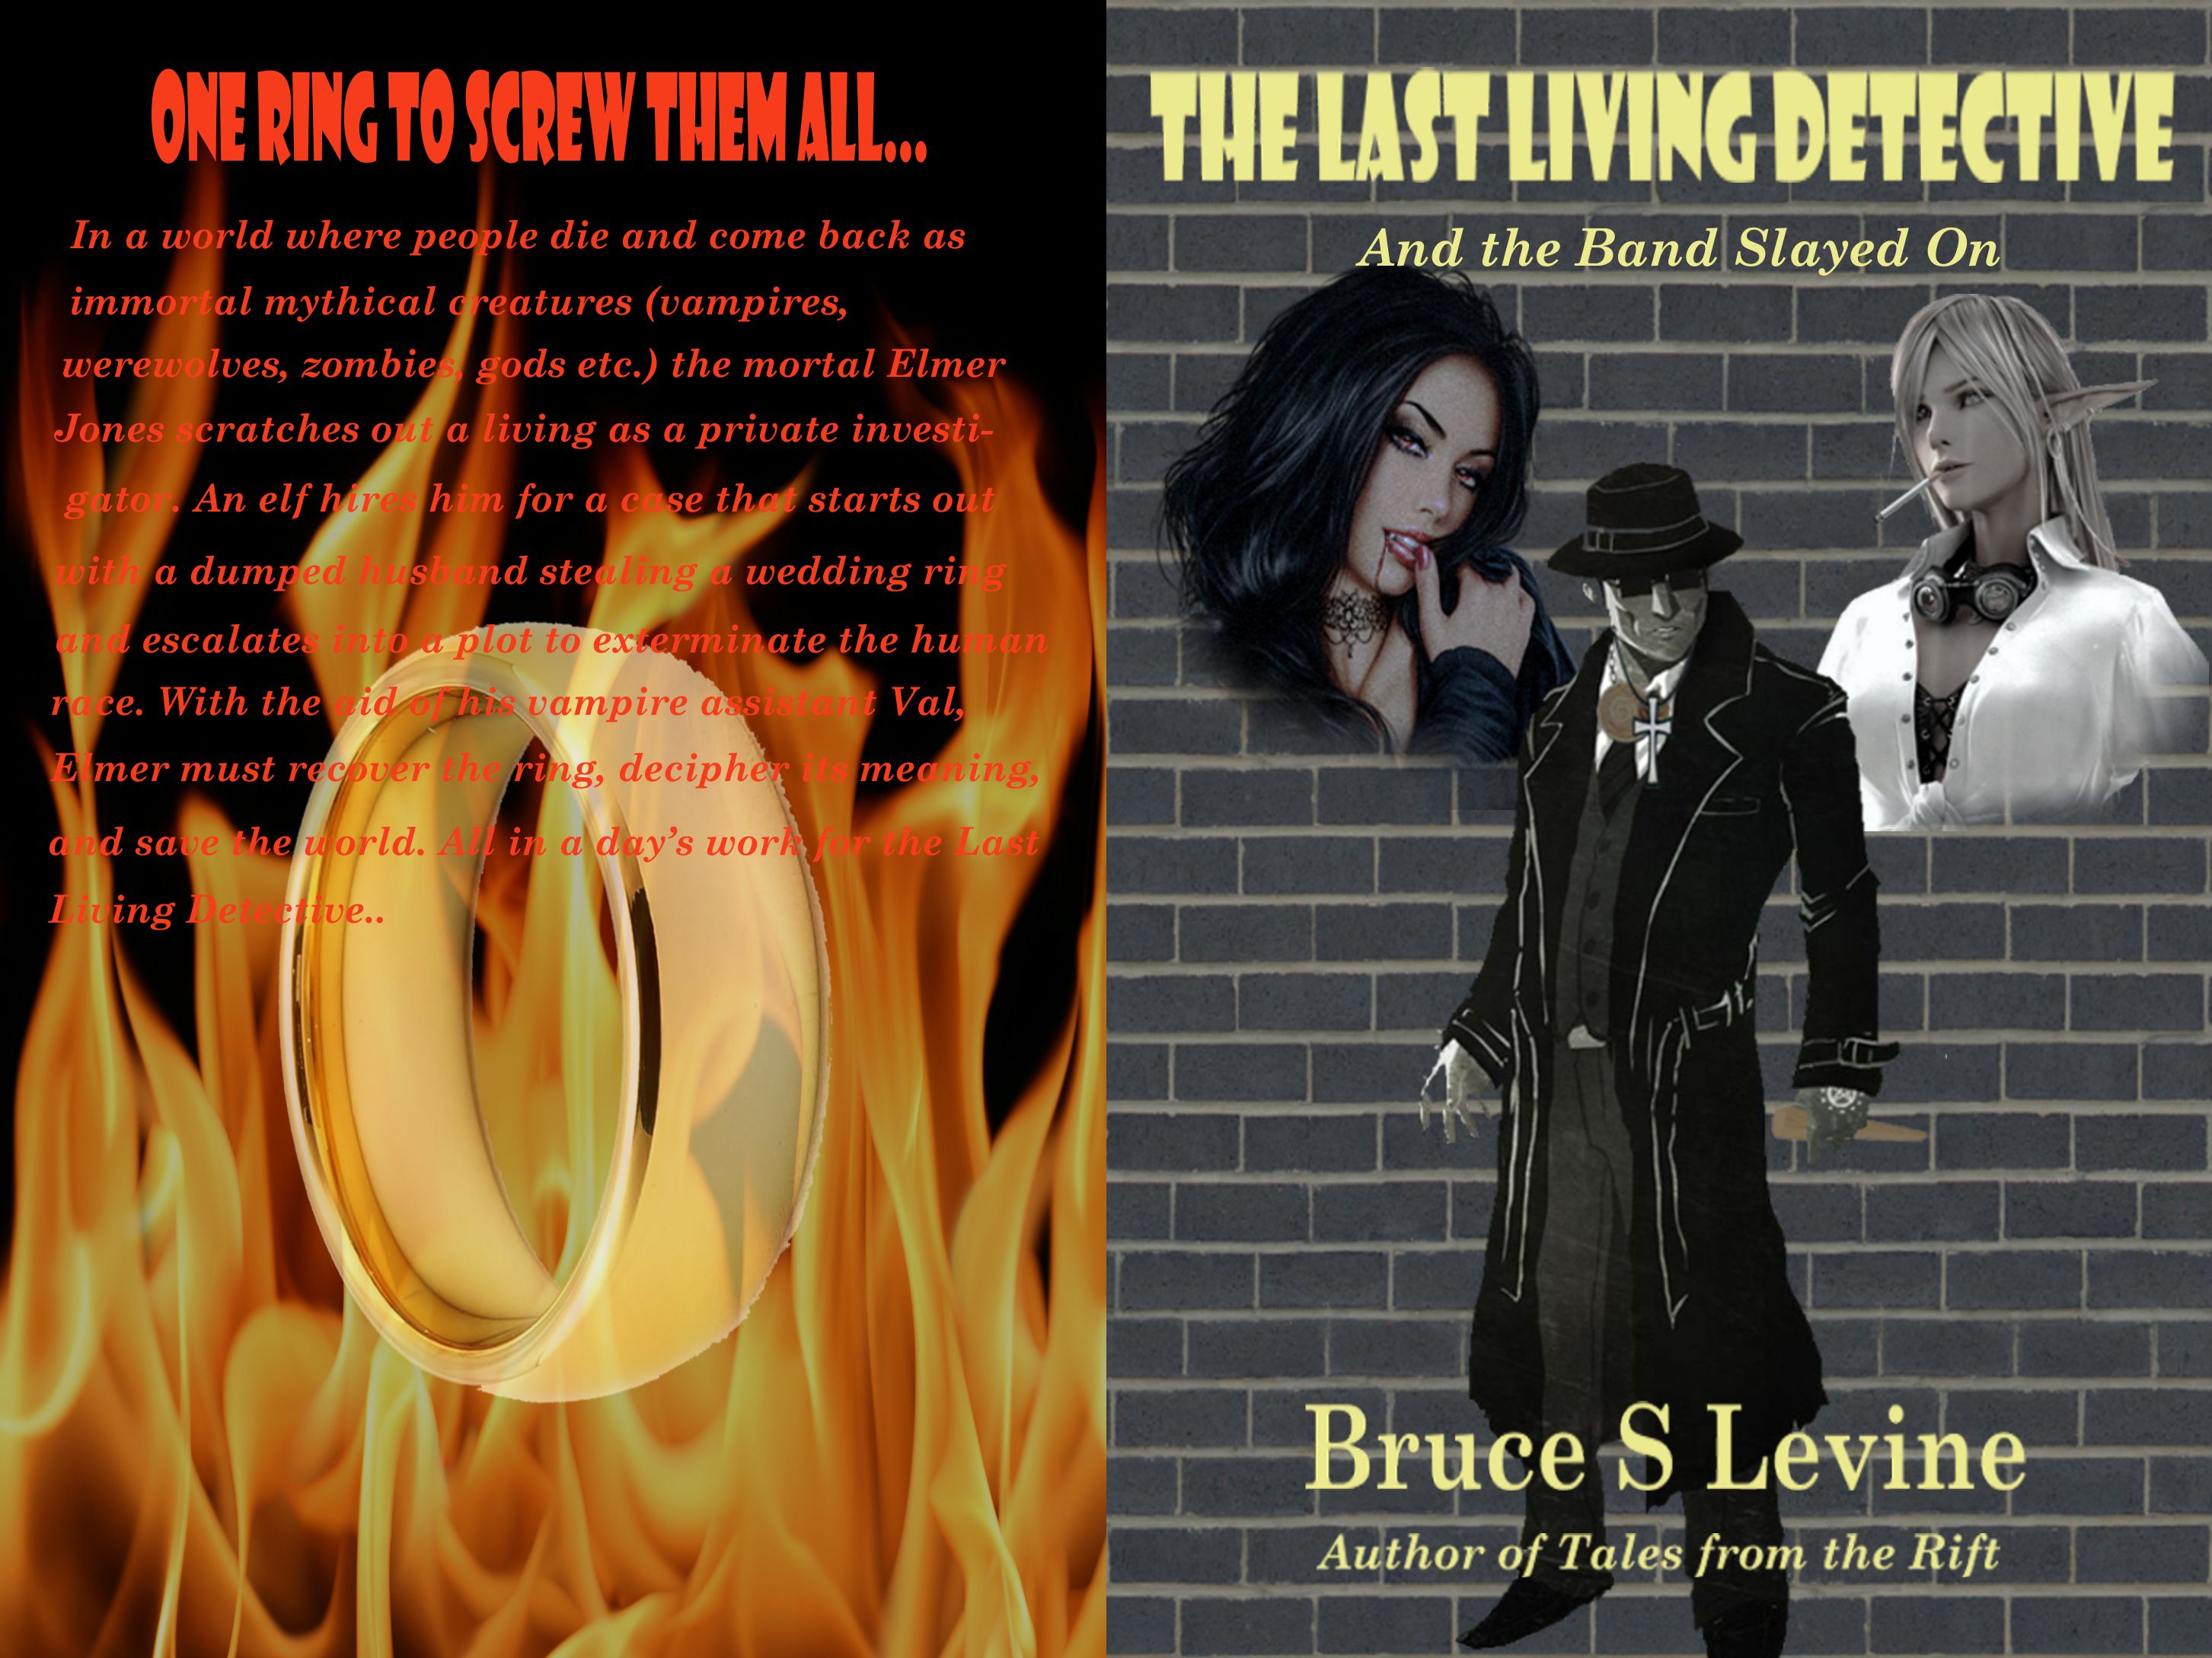 FREE: The Last Living Detective by Bruce Levine